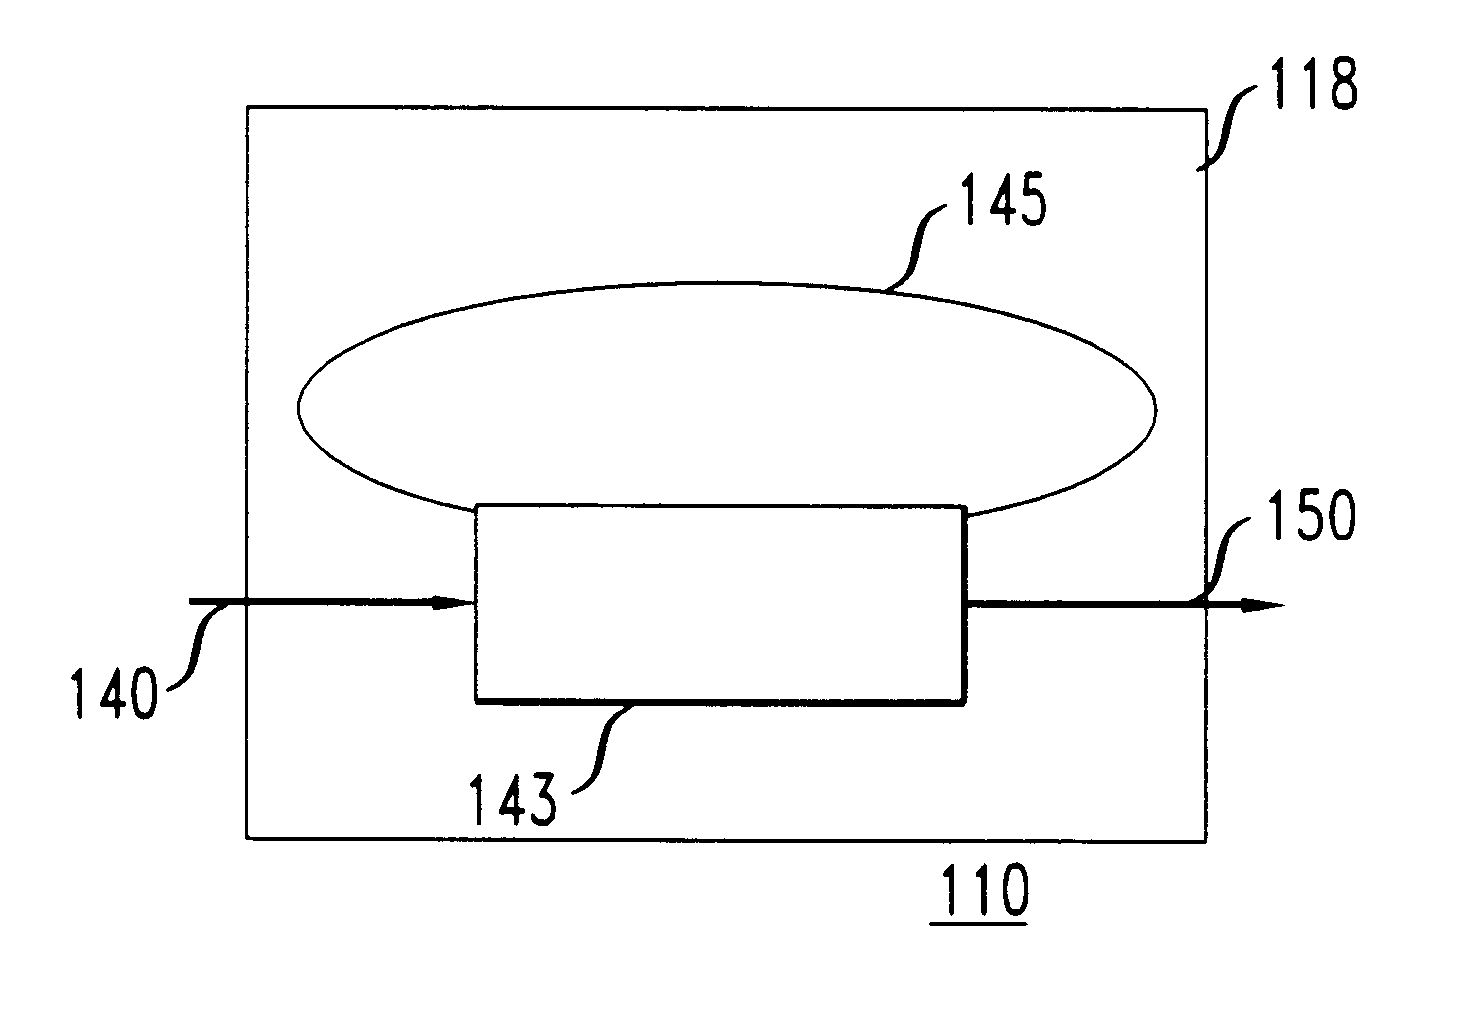 Optical channel selector